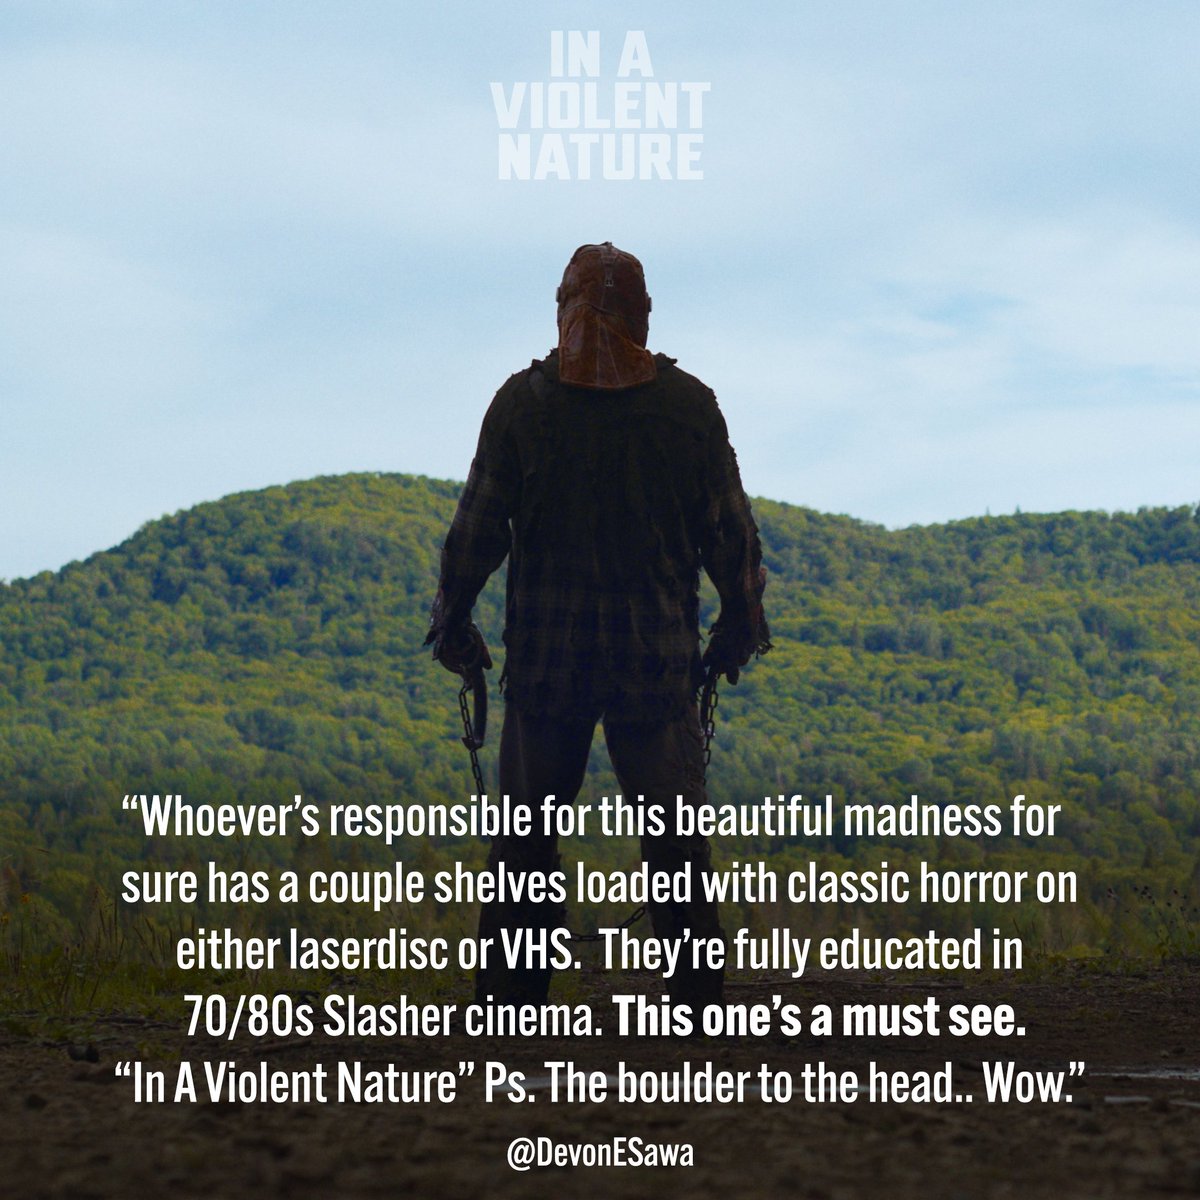 Some hot takes on our cold-blooded slasher 🔪🔪🔪 IN A VIOLENT NATURE is in theaters now! @DevonESawa 
 inaviolentnature.com